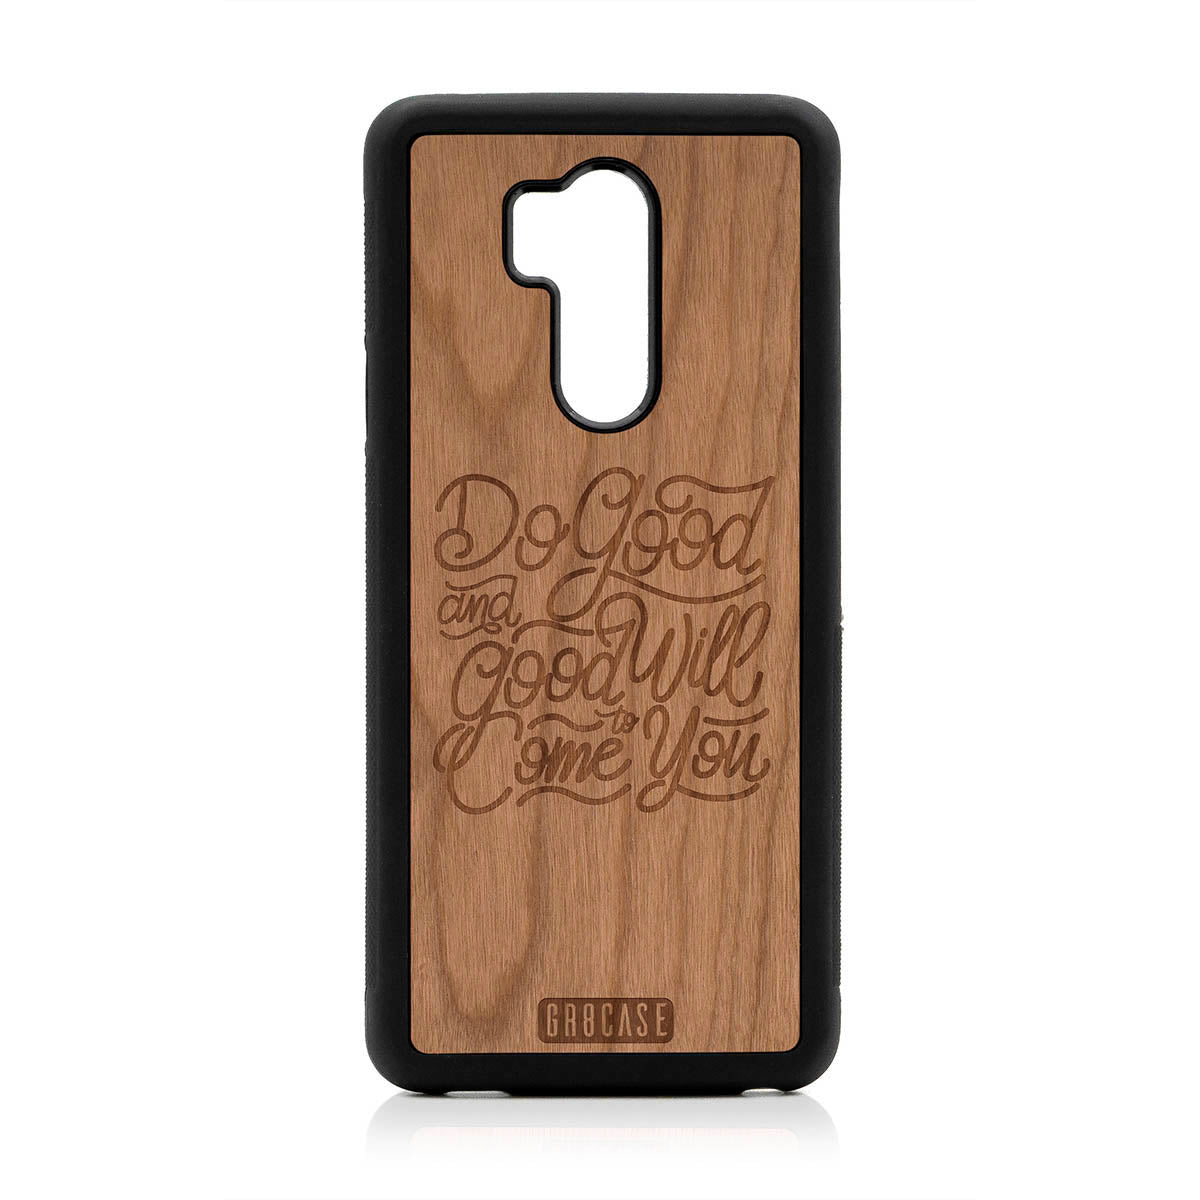 Do Good And Good Will Come To You Design Wood Case For LG G7 ThinQ by GR8CASE